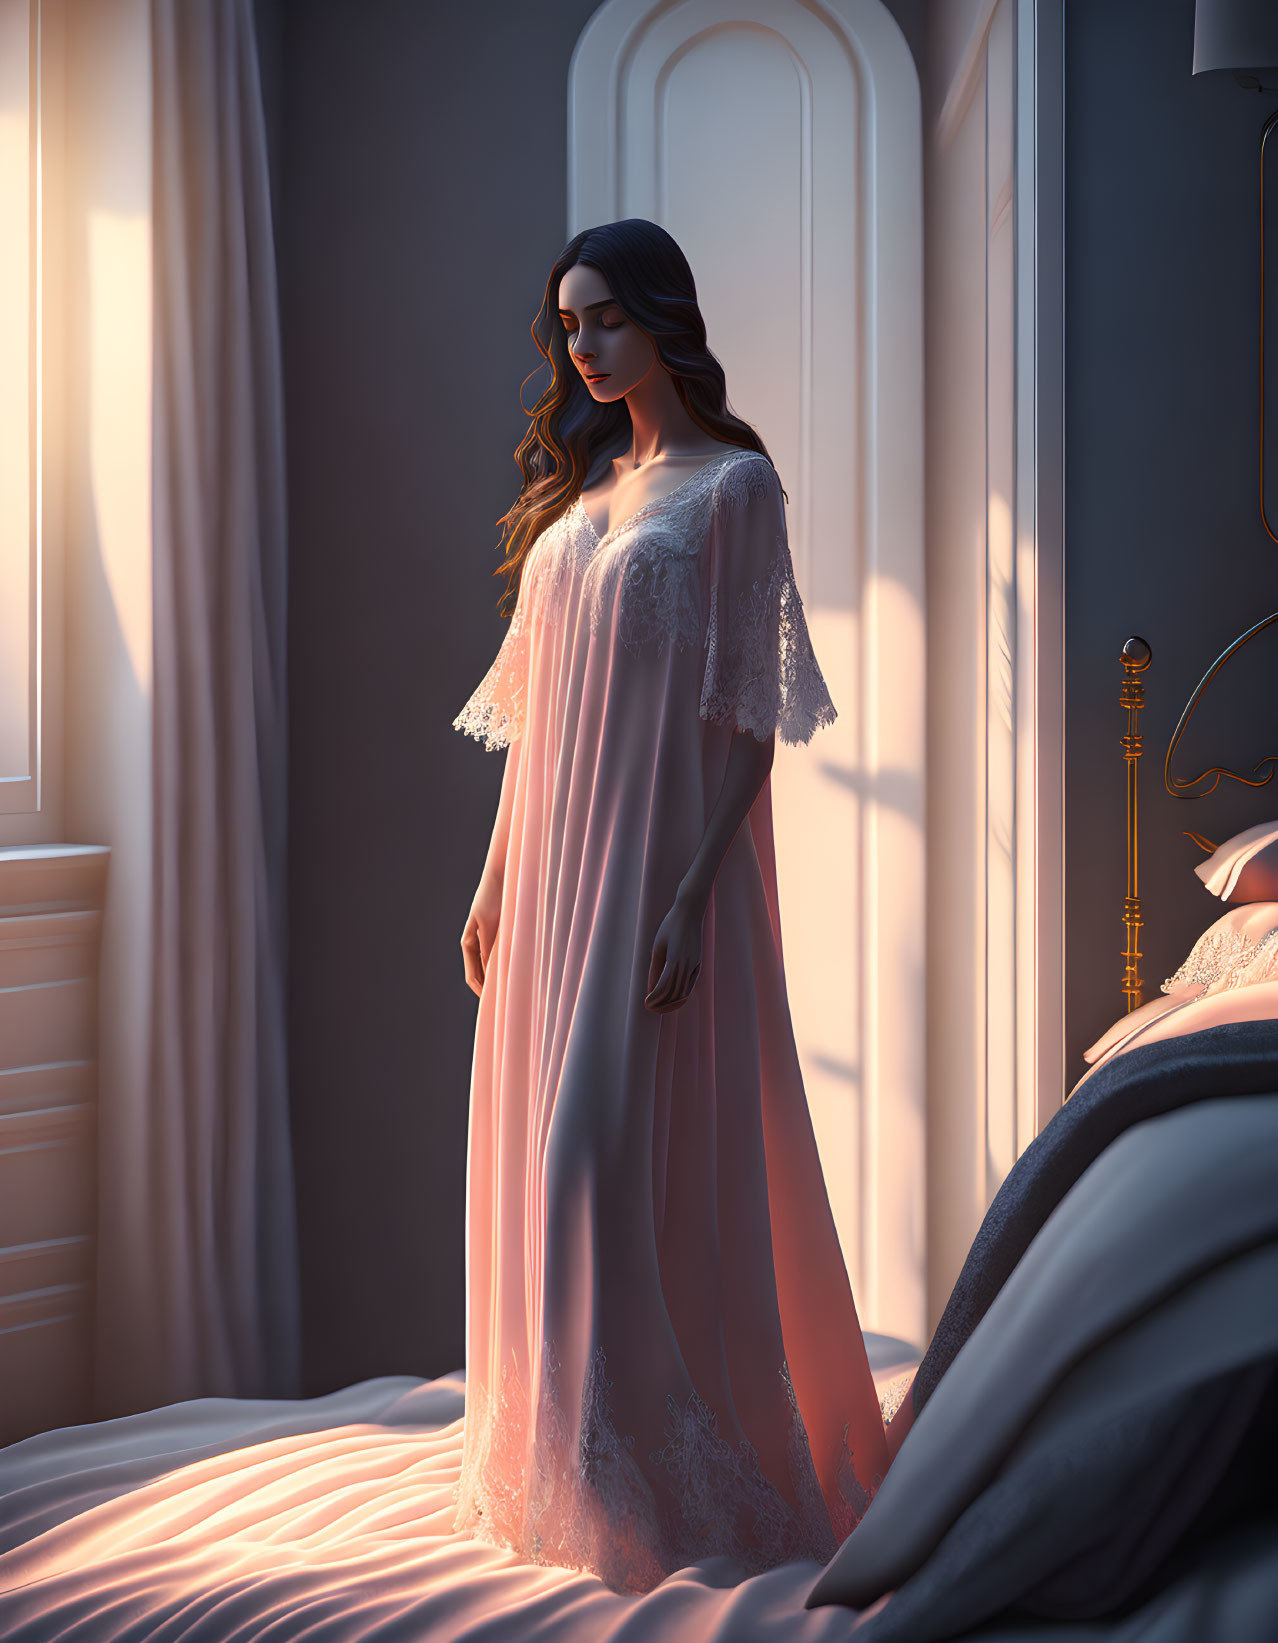 Serene woman in flowing nightgown by bed at dawn